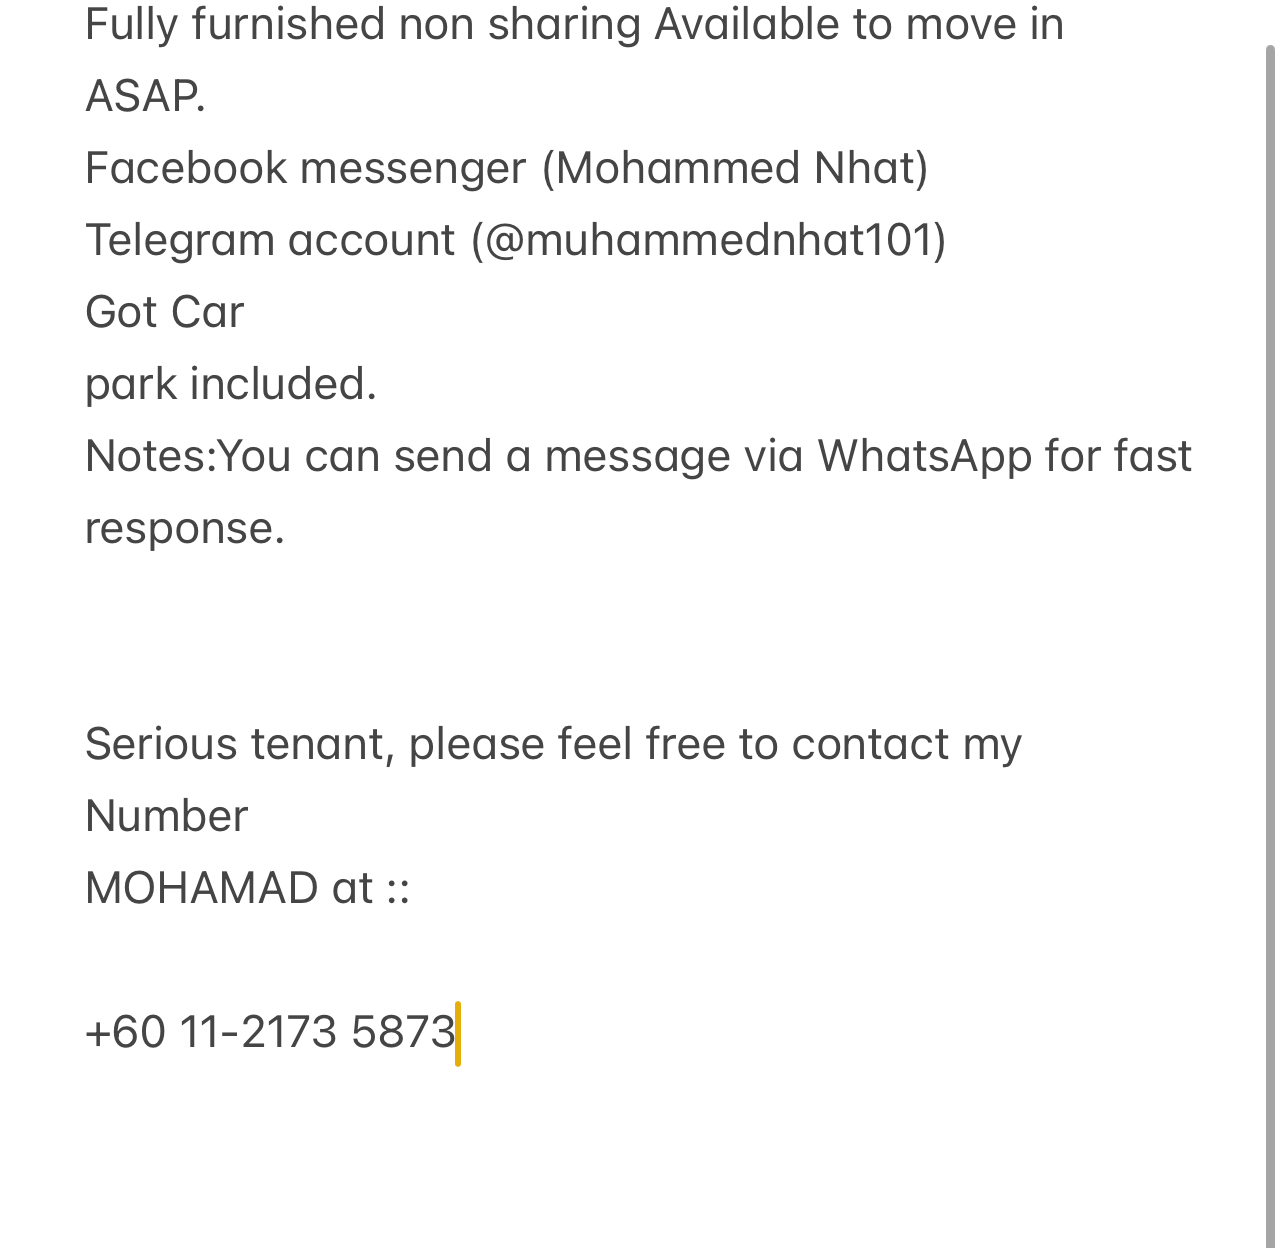 room for rent, studio, georgetown, Send the owner a message on WhatsApp/facebook if you want to RENT the unit facebook (Mohammed Nhat)&Telegram(@muhammednhat101) Fully furnished non sharing :(comfortable)